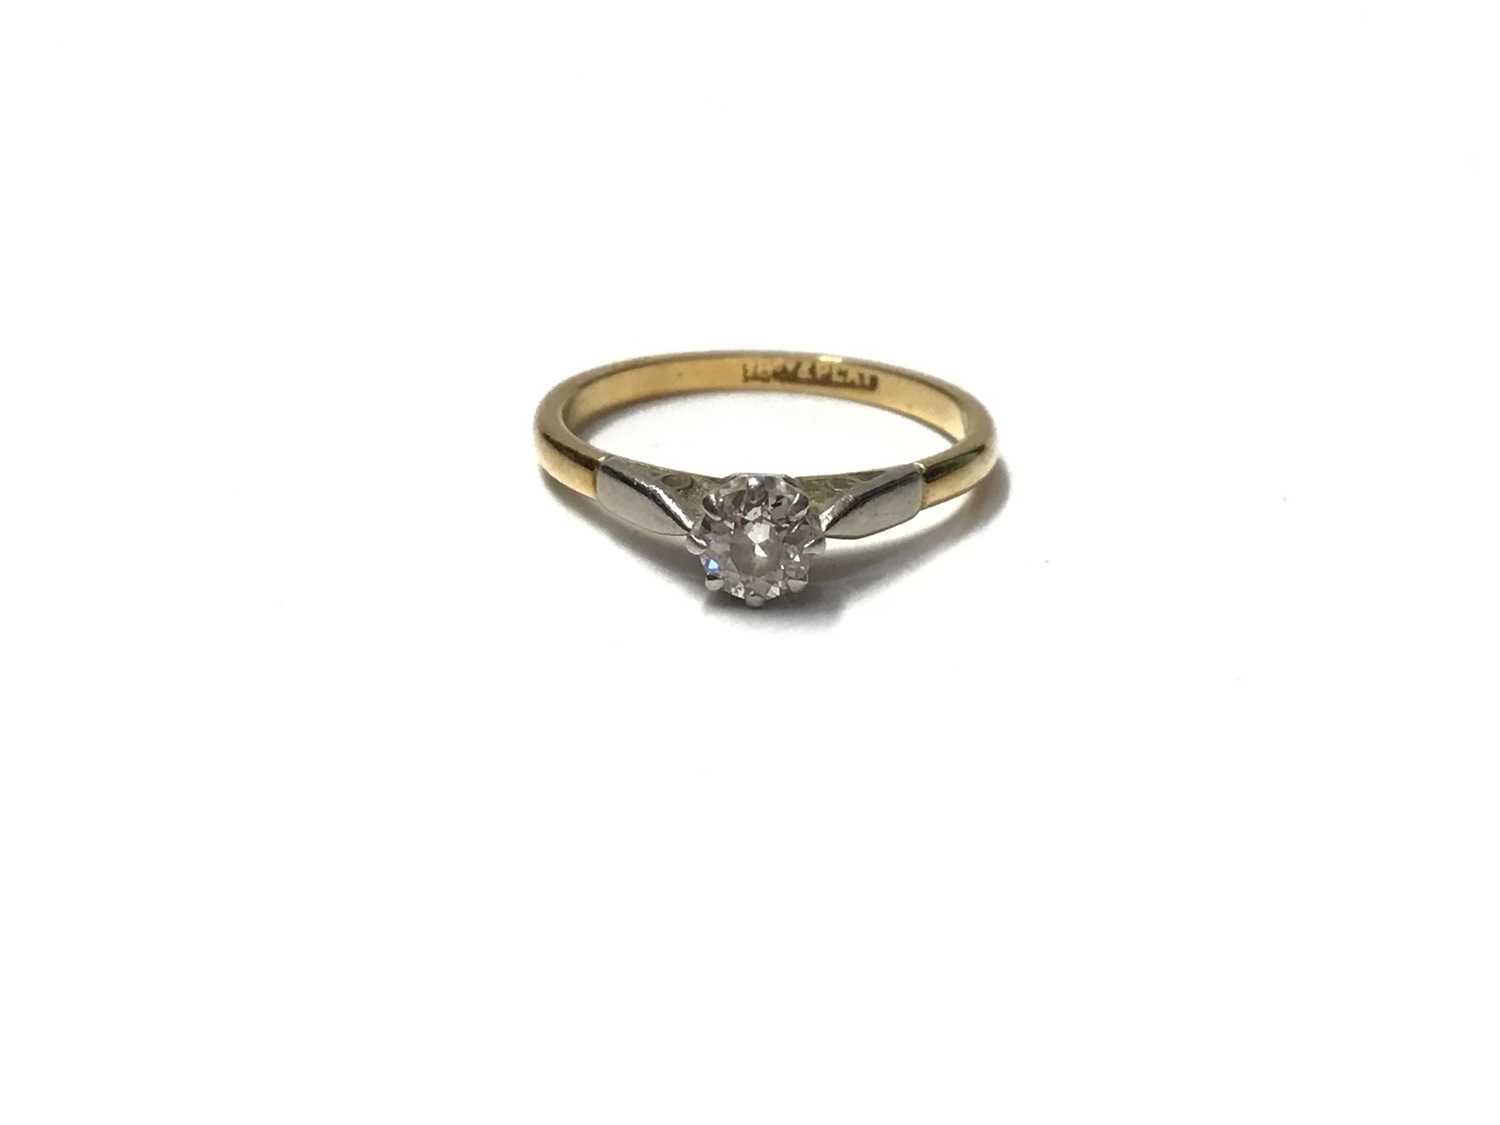 Lot 2 - Diamond single stone ring with a brilliant cut diamond estimated to weigh approximately 0.25cts in platinum setting on 18ct yellow gold shank